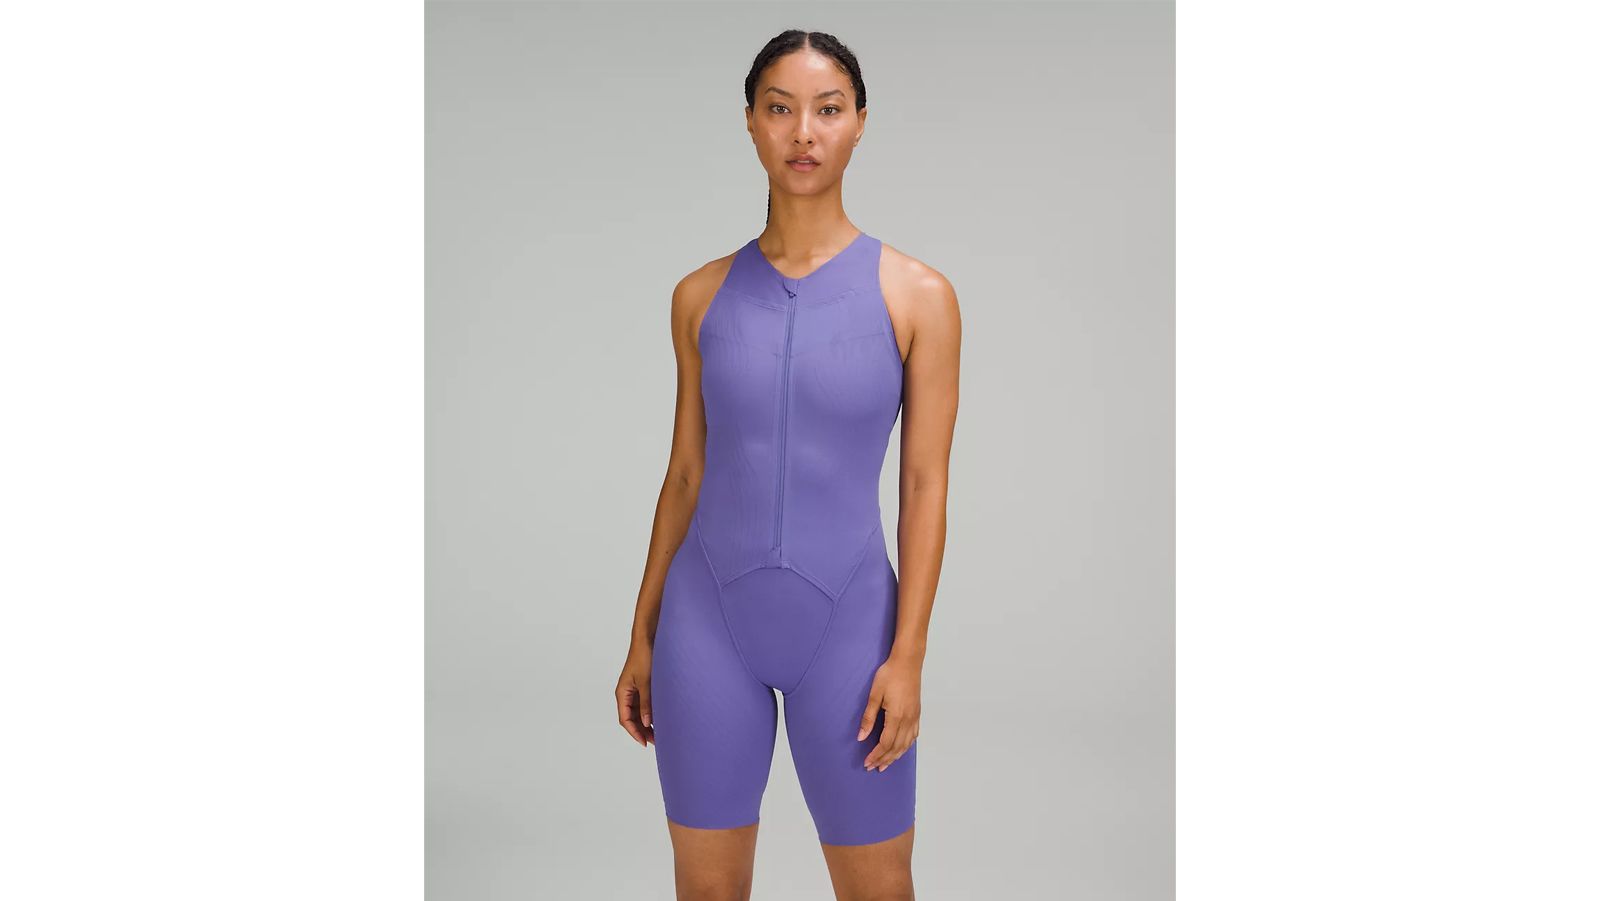 Price drop of $168 to $98? Is this a mistake? It's not on WMTM. Thoughts on  Senseknit HR running tights? : r/lululemon